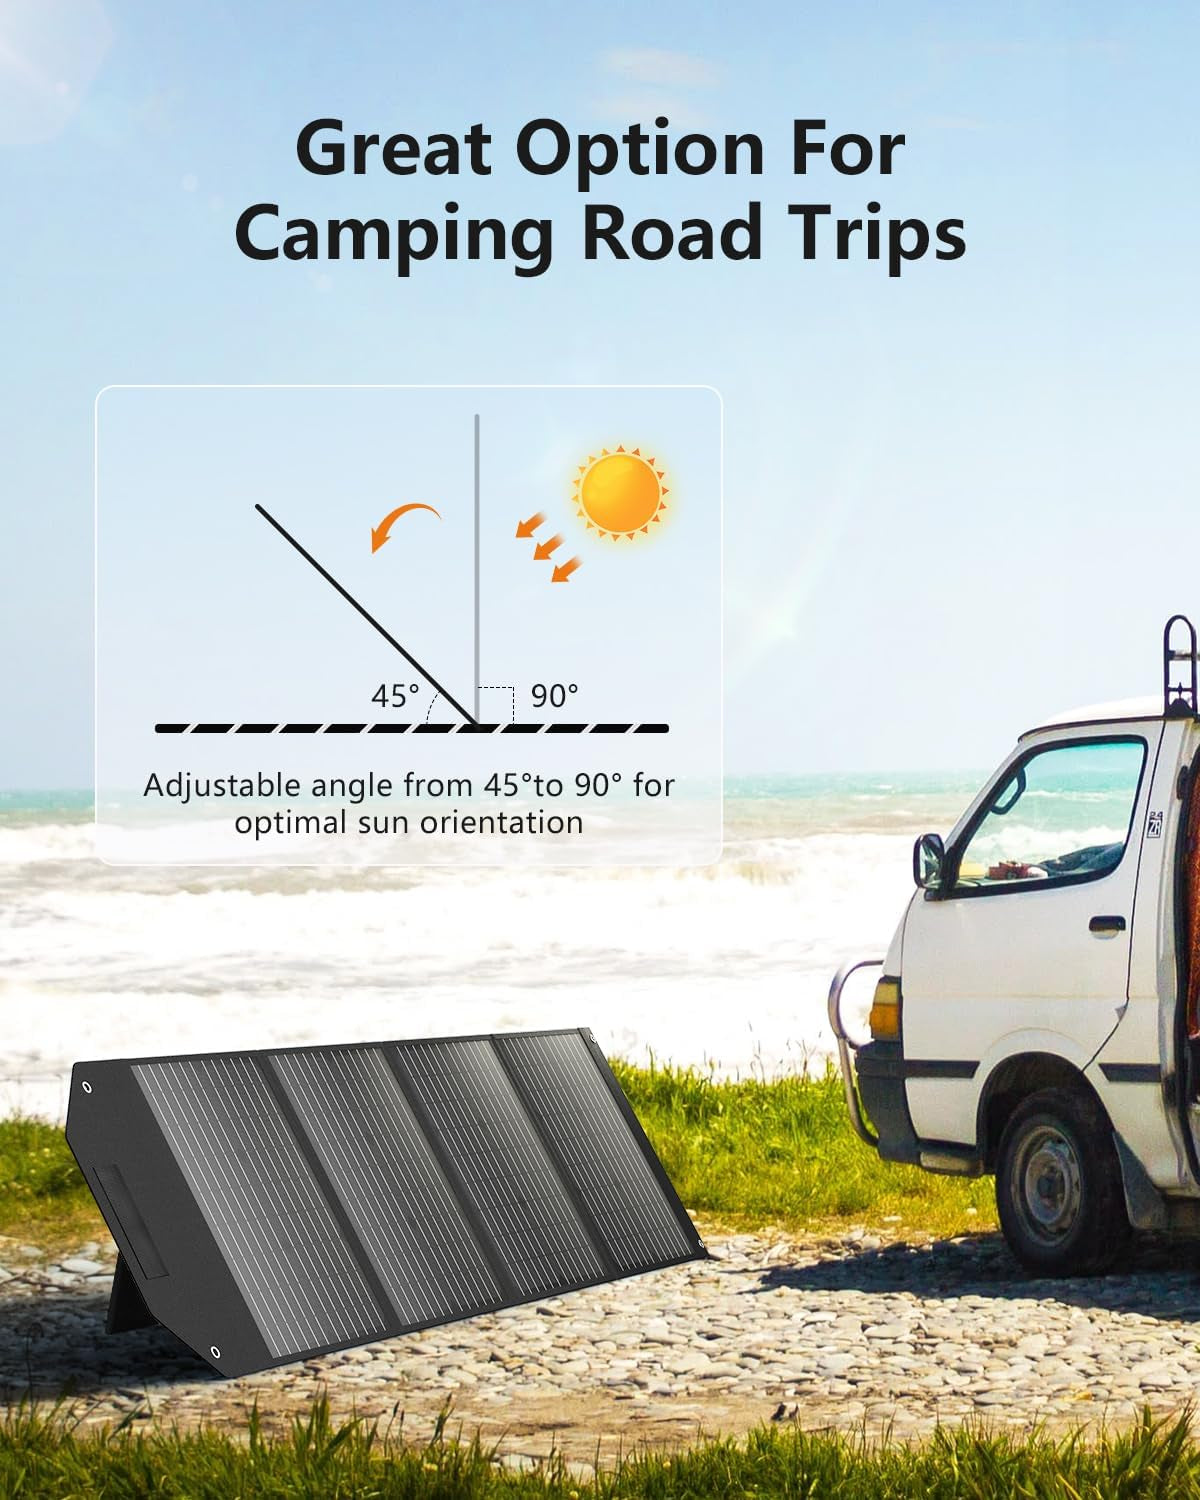 237Wh Portable Solar Power Station Set-300W Camping Solar Generator and 100W Portable Solar Panel Foldable Solar Charger for Iphone, Ipad, Laptop, RV, Camping, Outdoor Adventures, Power Outage